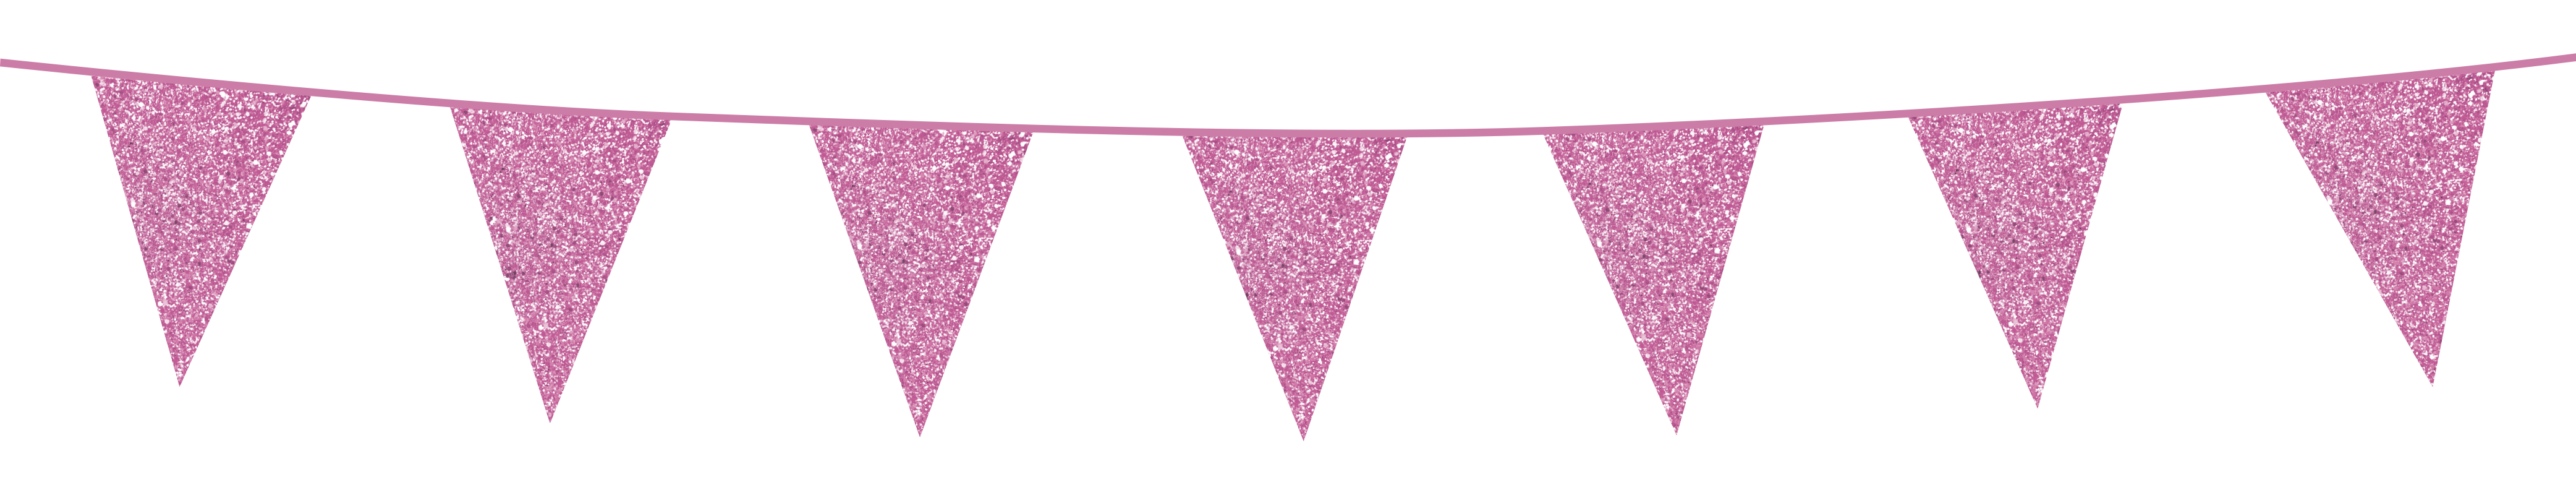 Bunting Glitter 6m. baby pink - size flags 20x30cm per 6